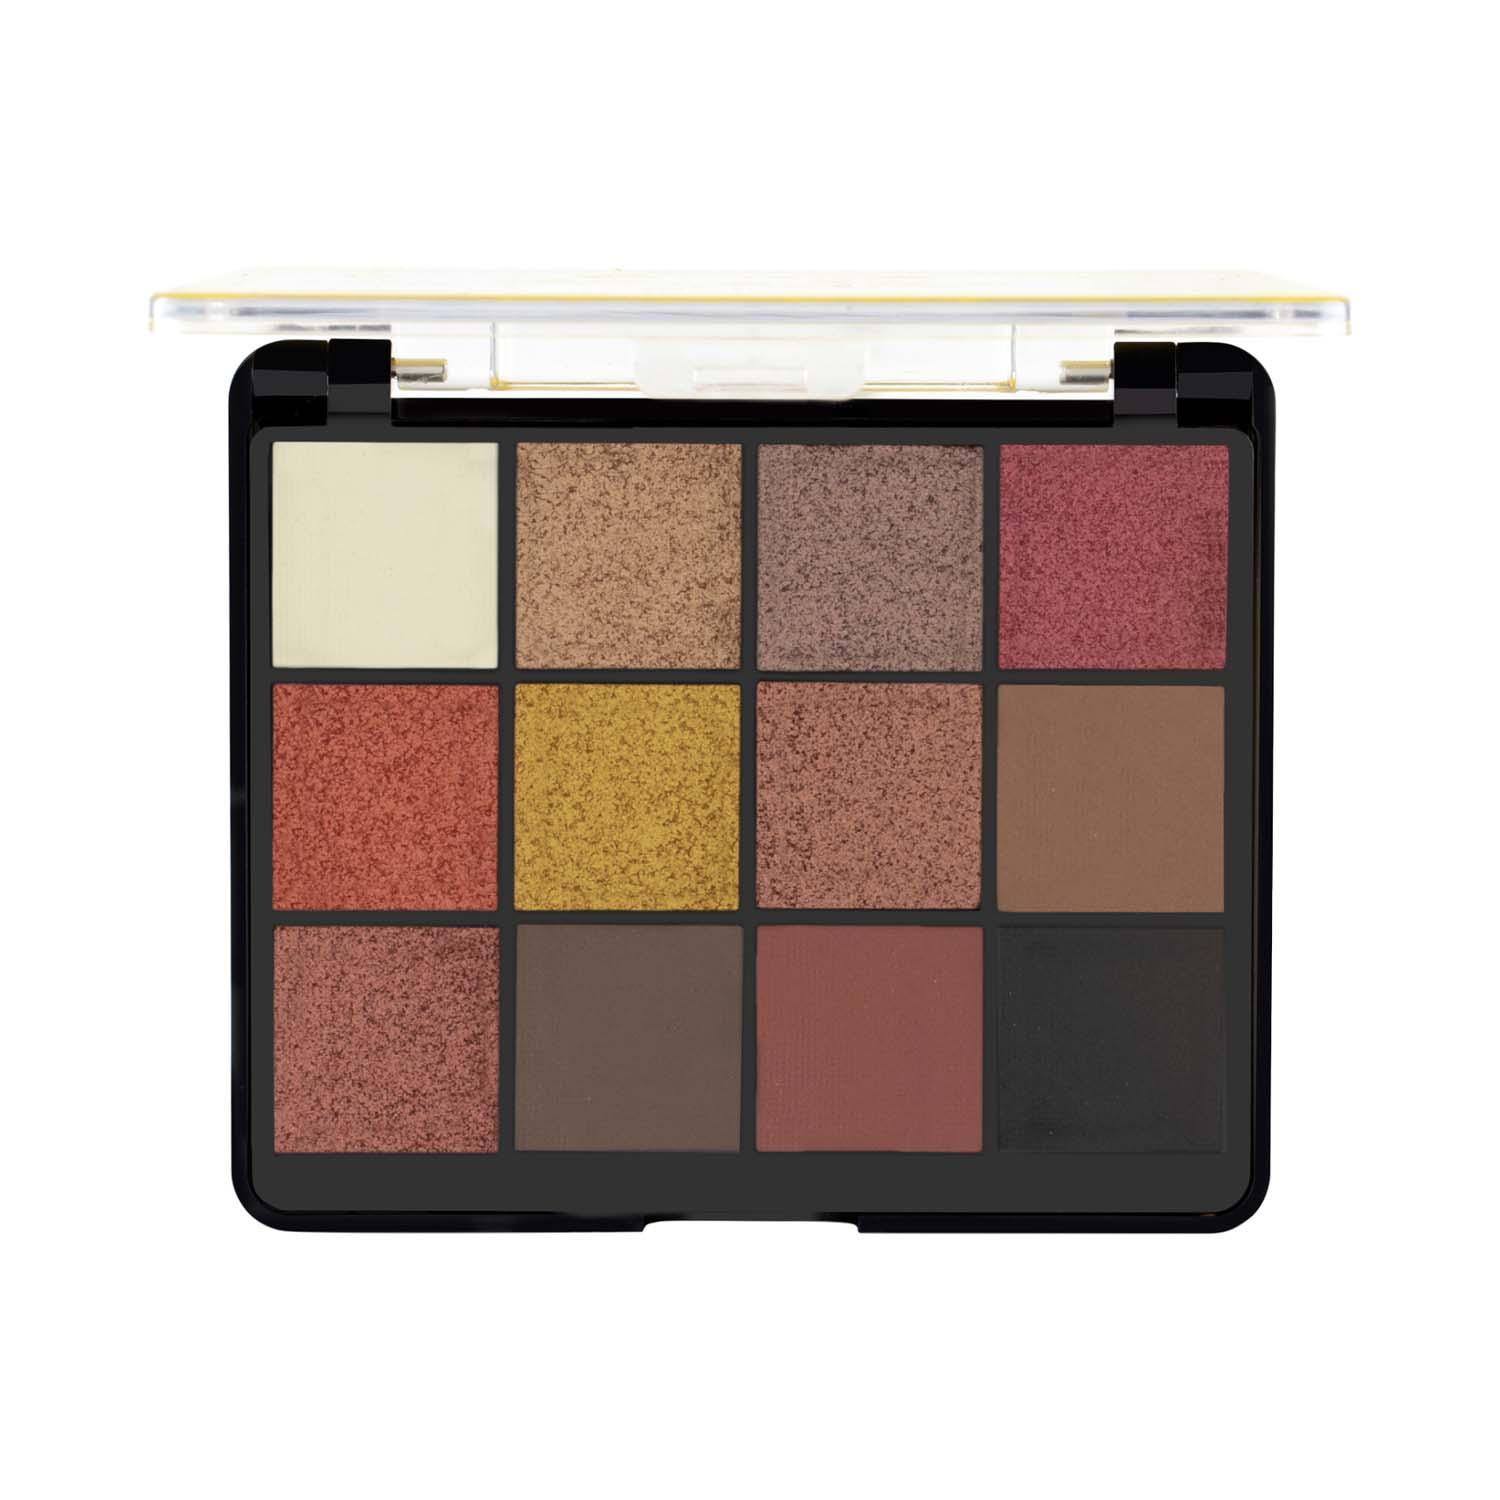 MARS | MARS Firefly Makeup Palette With Eyeshadows Highlighter Blusher And Bronzer - 02 (26 g)